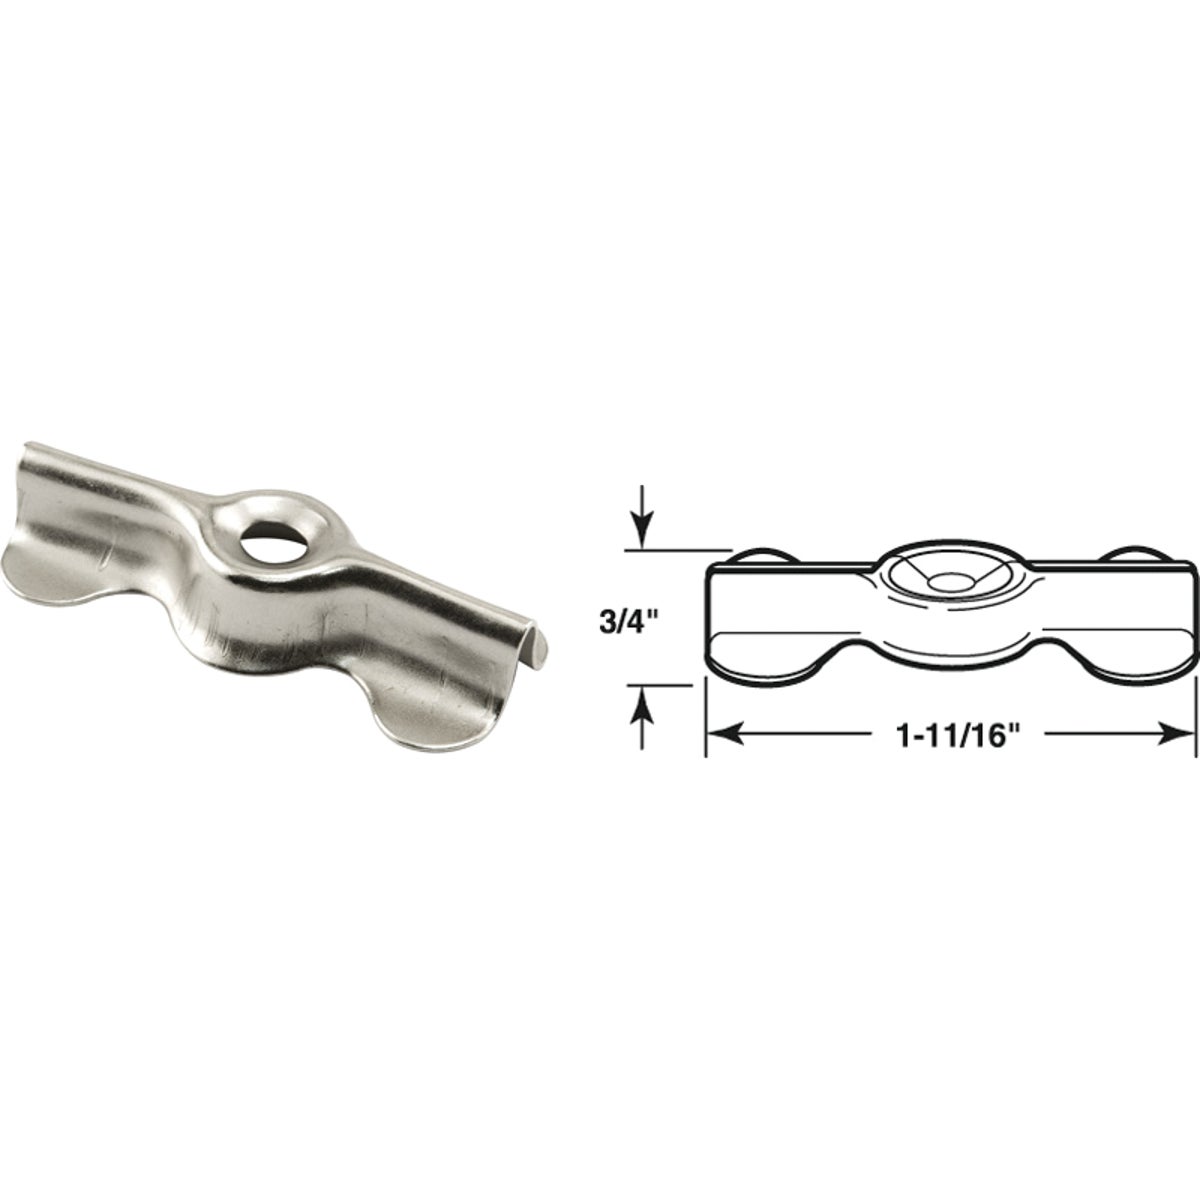 Item 258830, Nickel-plated steel, double wing clips used to attach screens and storm 